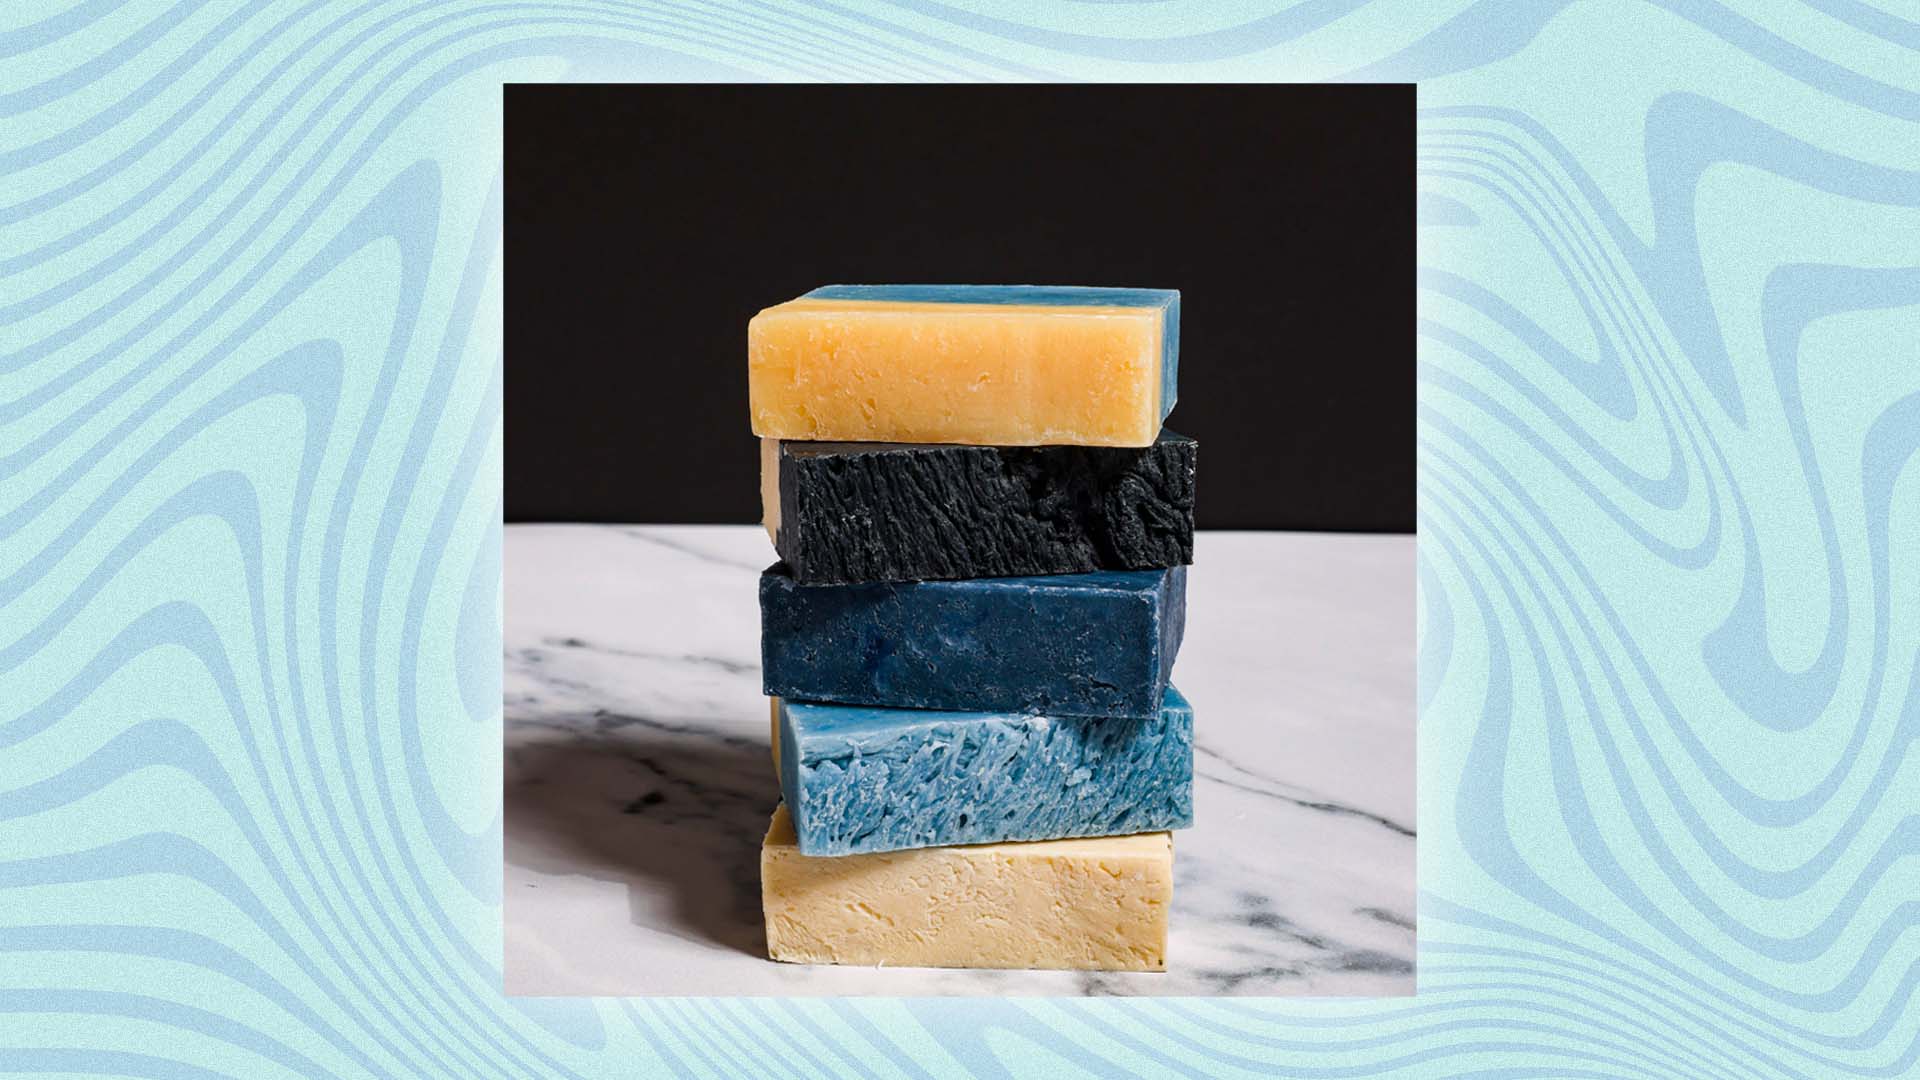 New Tactical Soap Fragrances from Grondyke Soap Company 